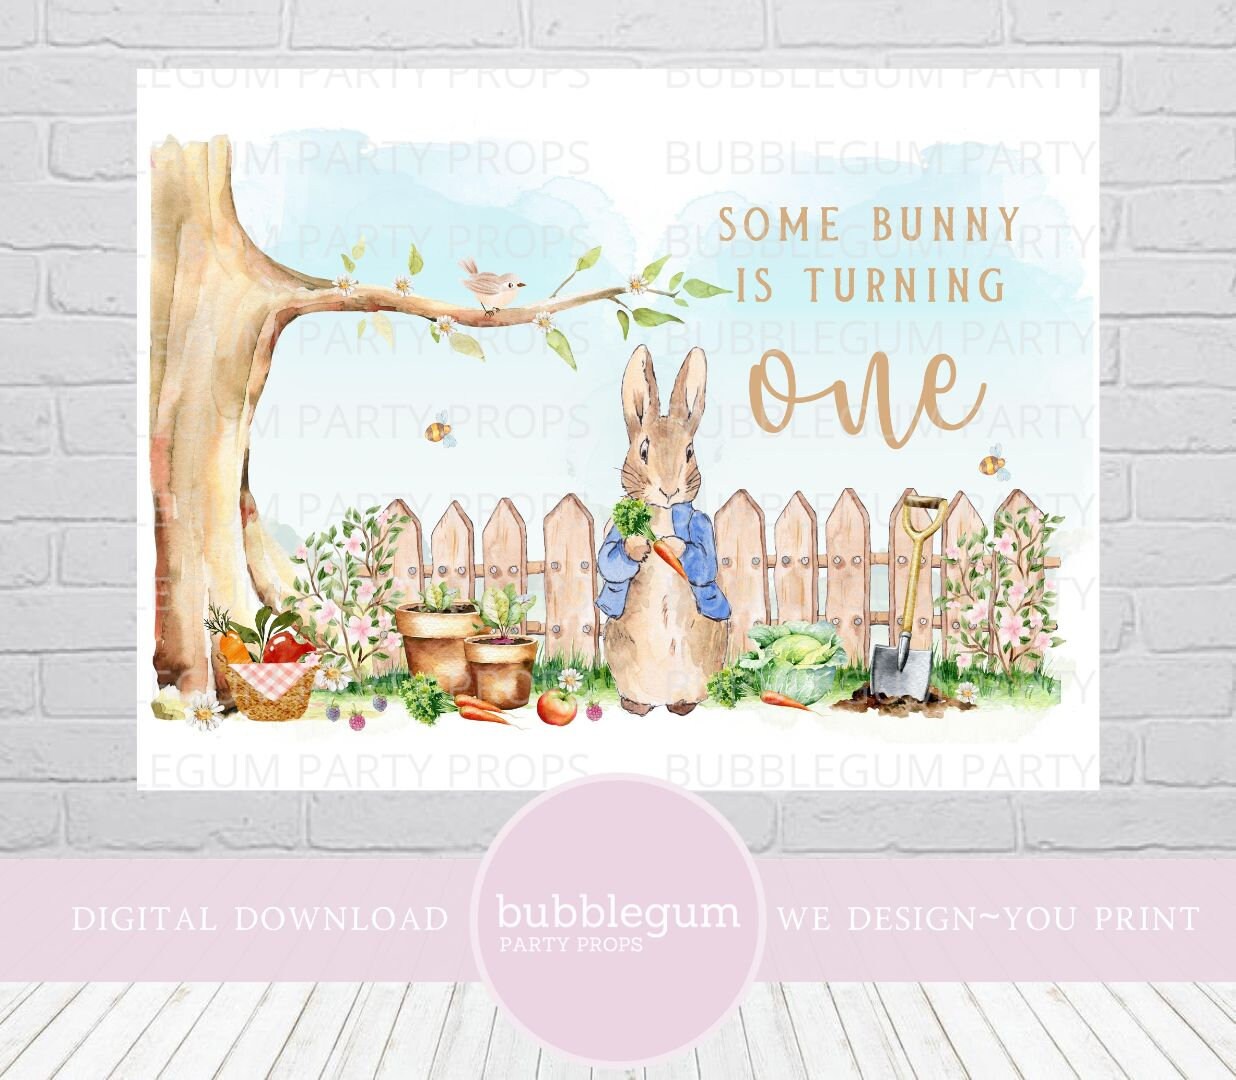 Peter Rabbit Backdrops Baby Shower Birthday Party Photo Background Banner  Decor